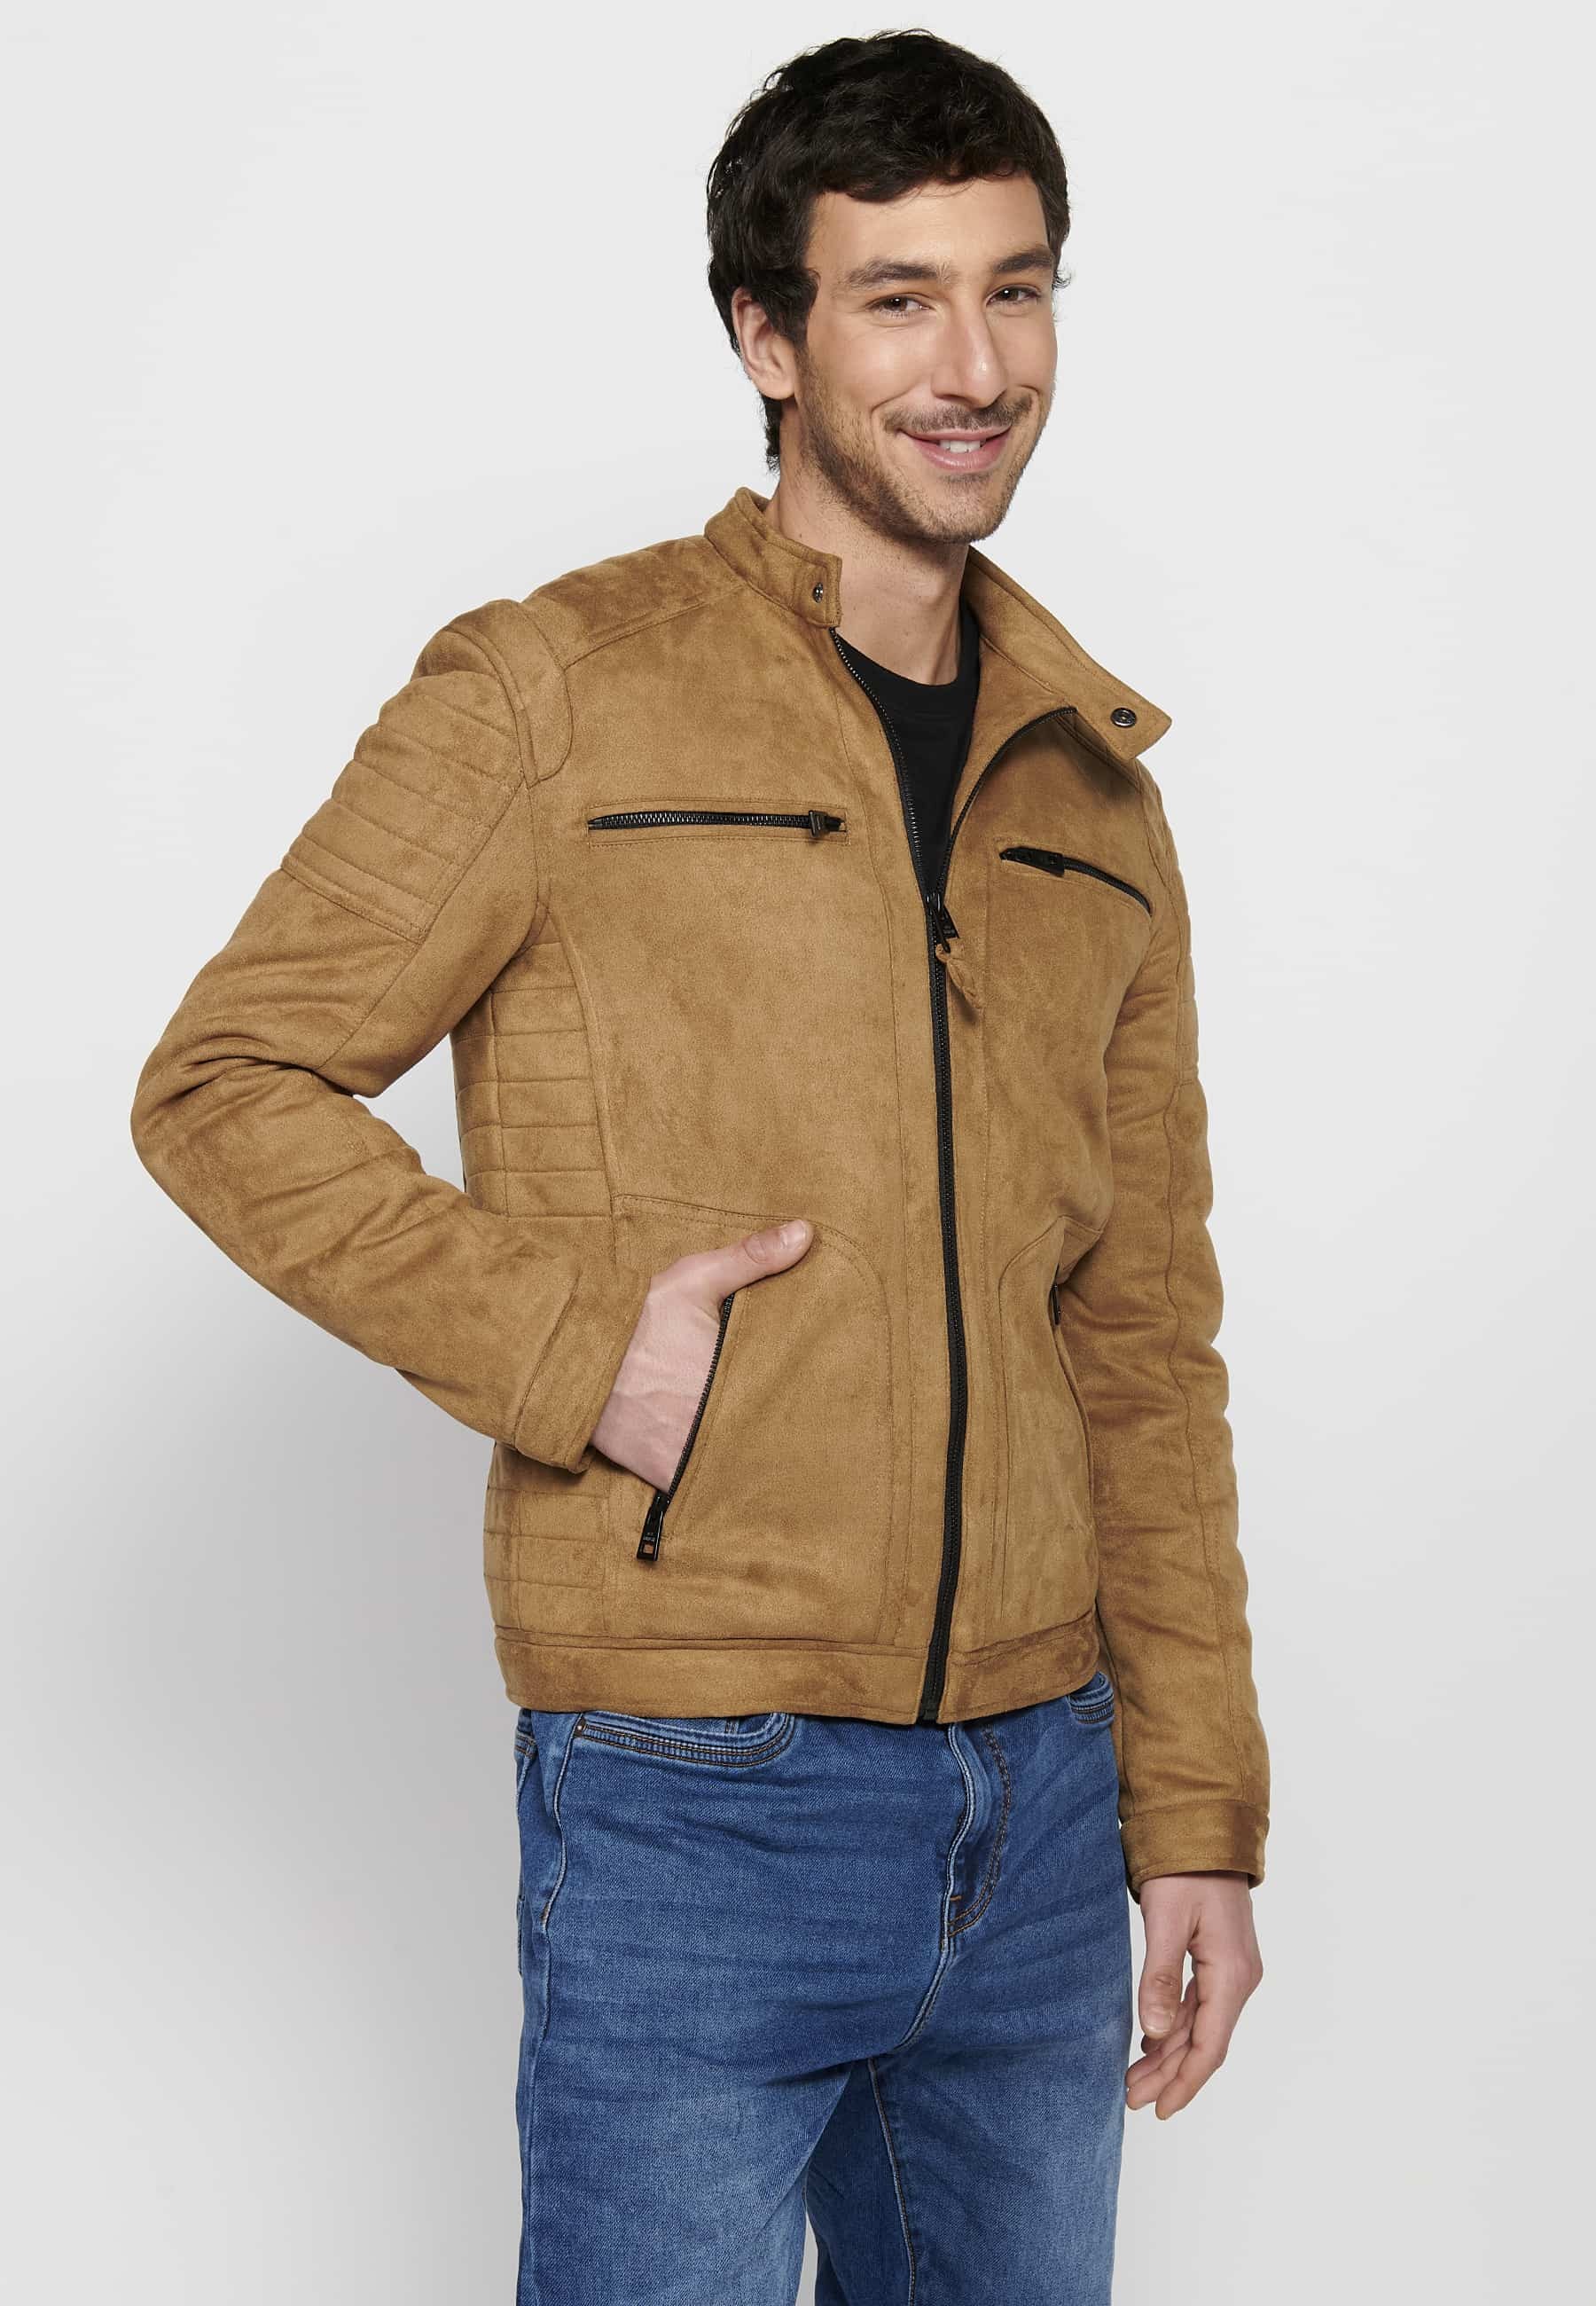 Men's Long Sleeve Jacket with Round Neck and Zipper Front Closure with Four Pockets in Tan Color